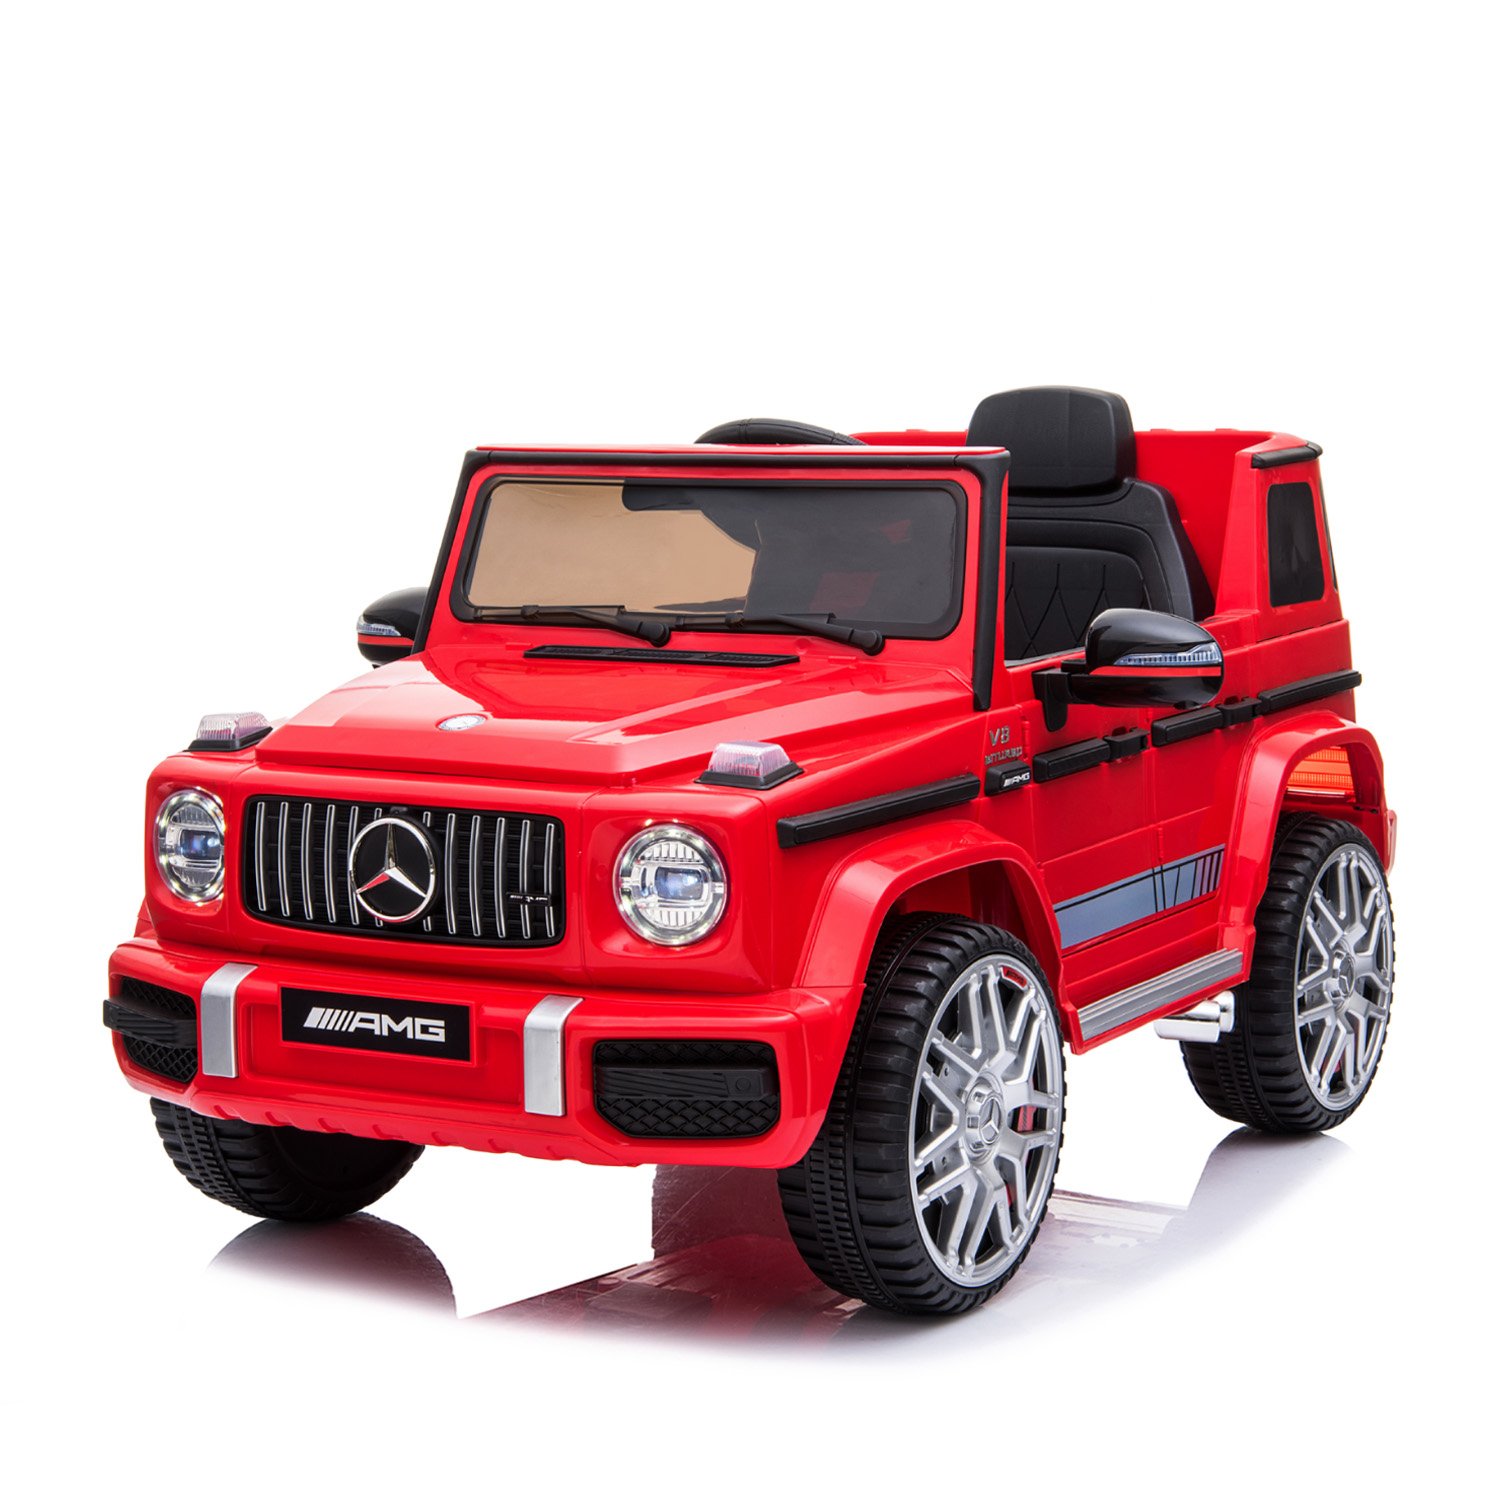 Mercedes Benz AMG G63 Licensed Kids Ride On Electric Car Remote Control - Red 2